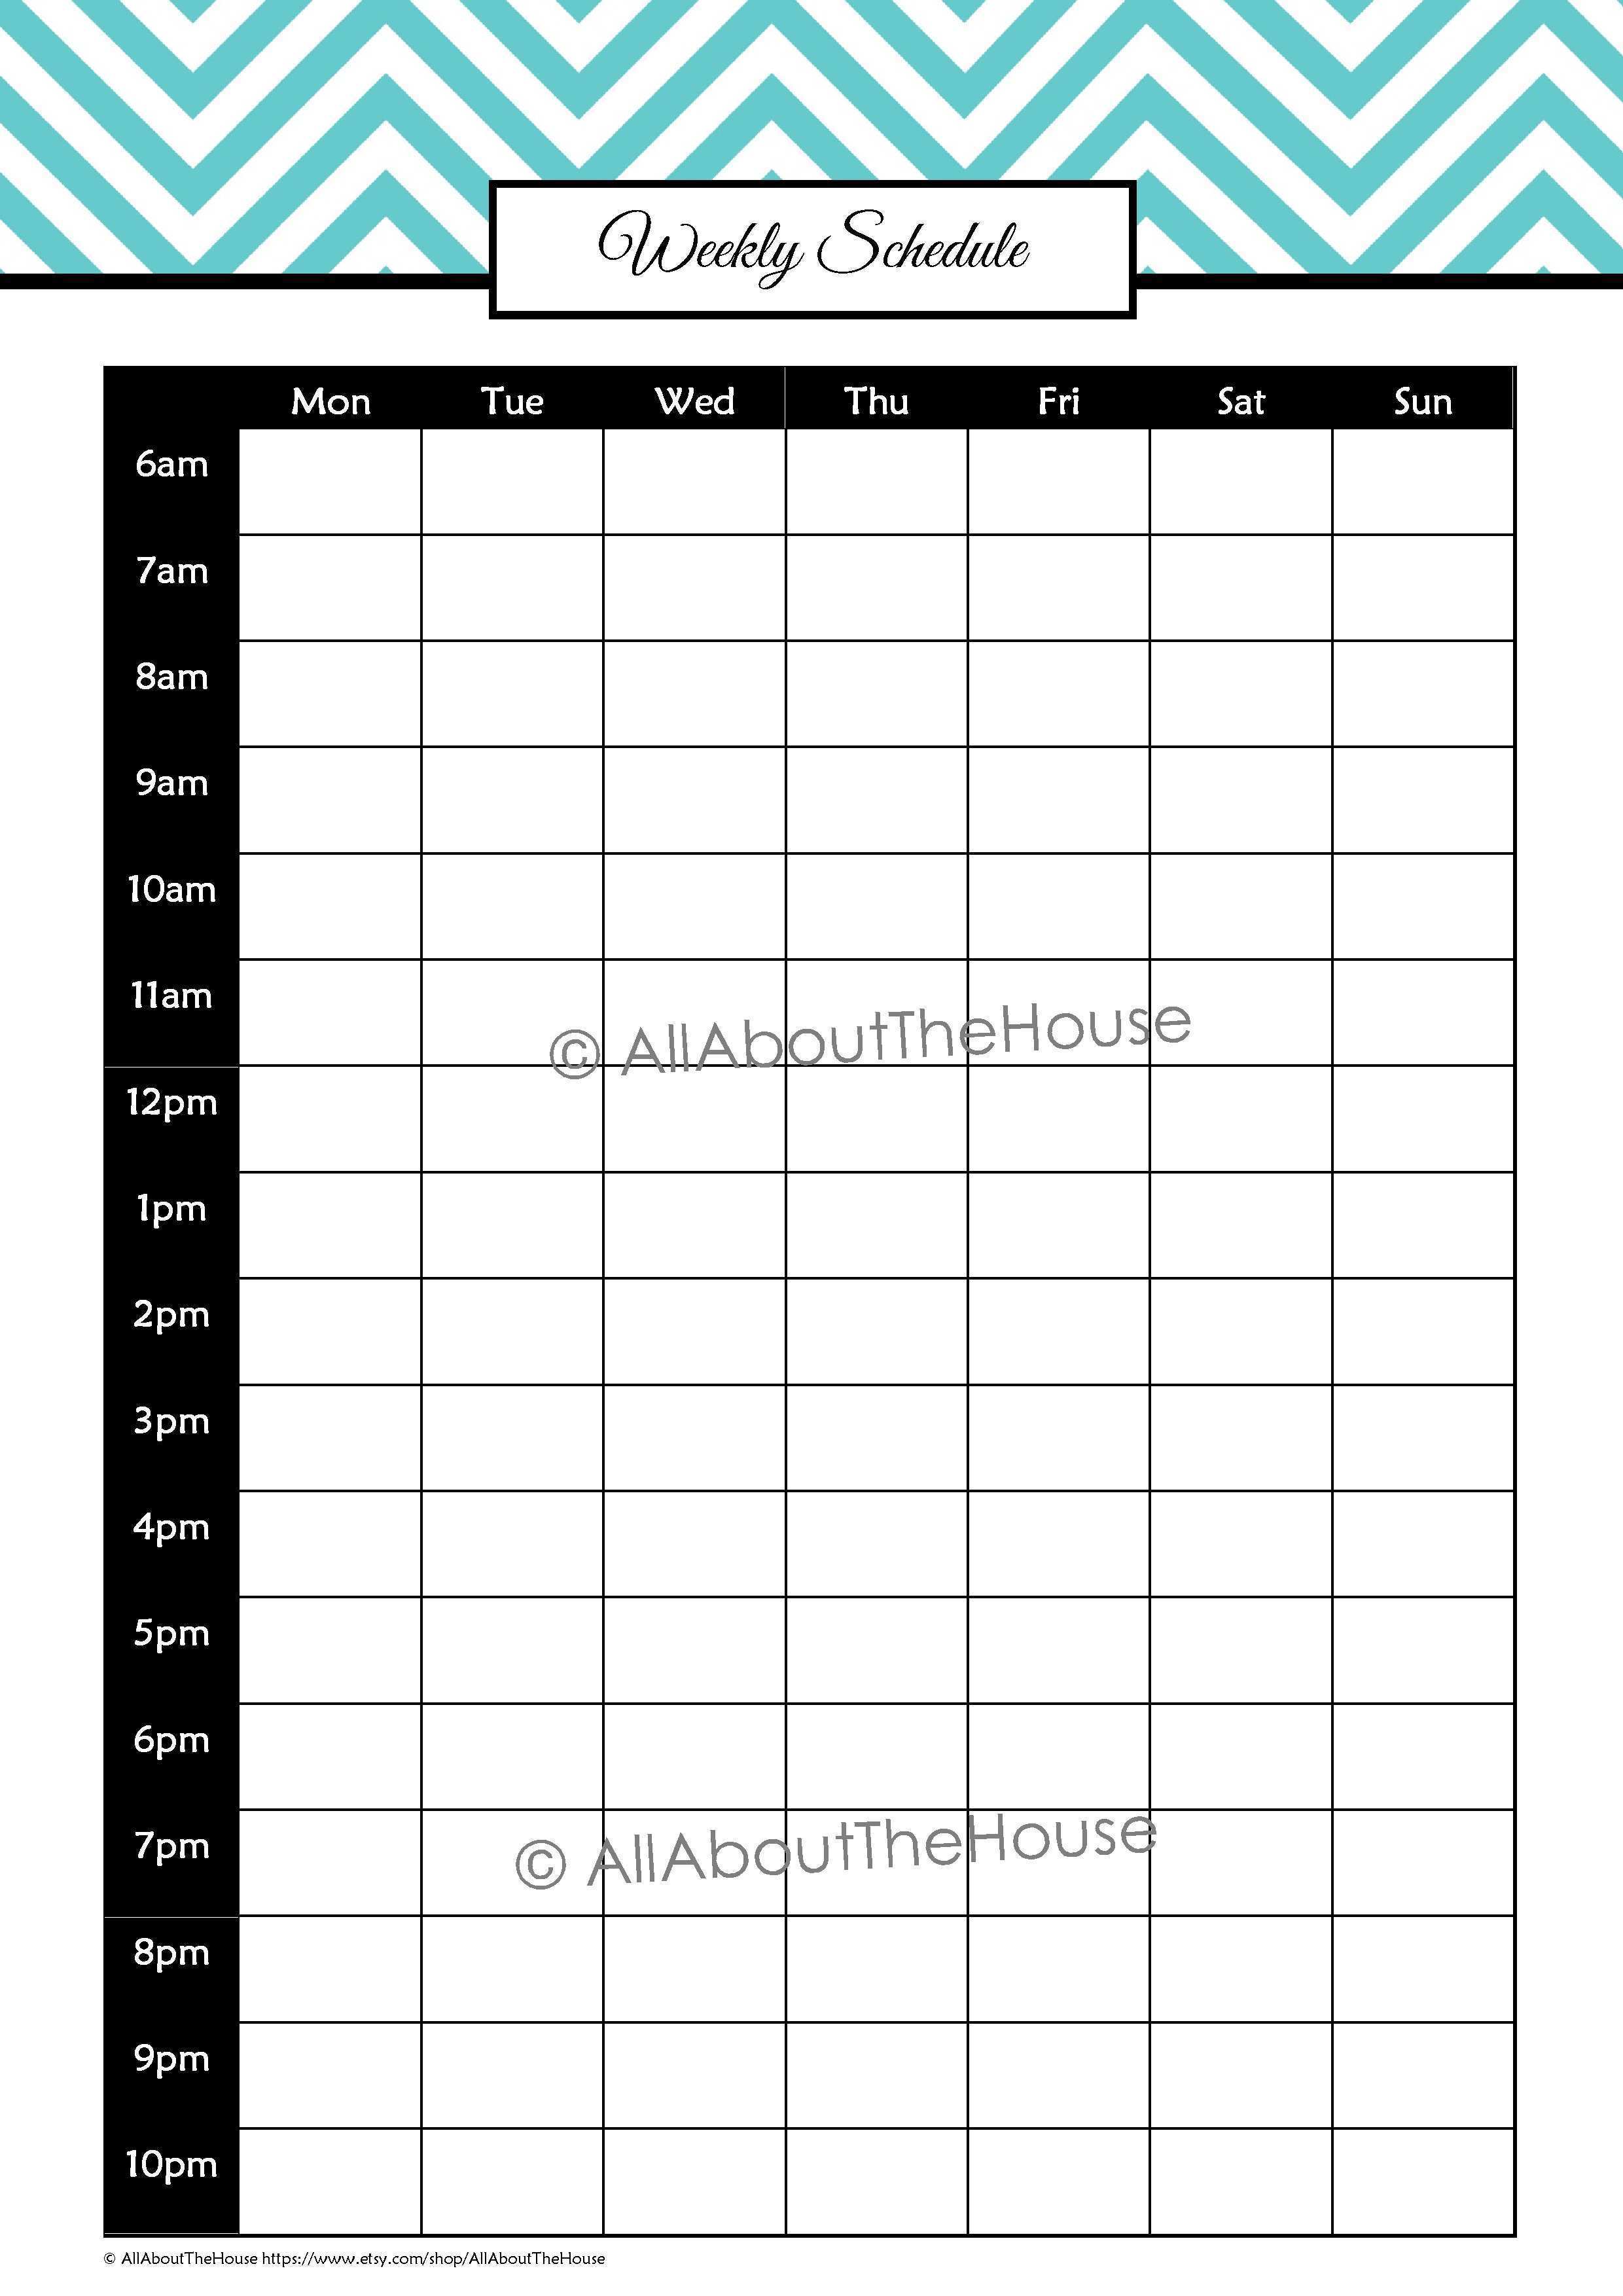 50 Best Student Schedule Template Free With Stunning Design by Student Schedule Template Free